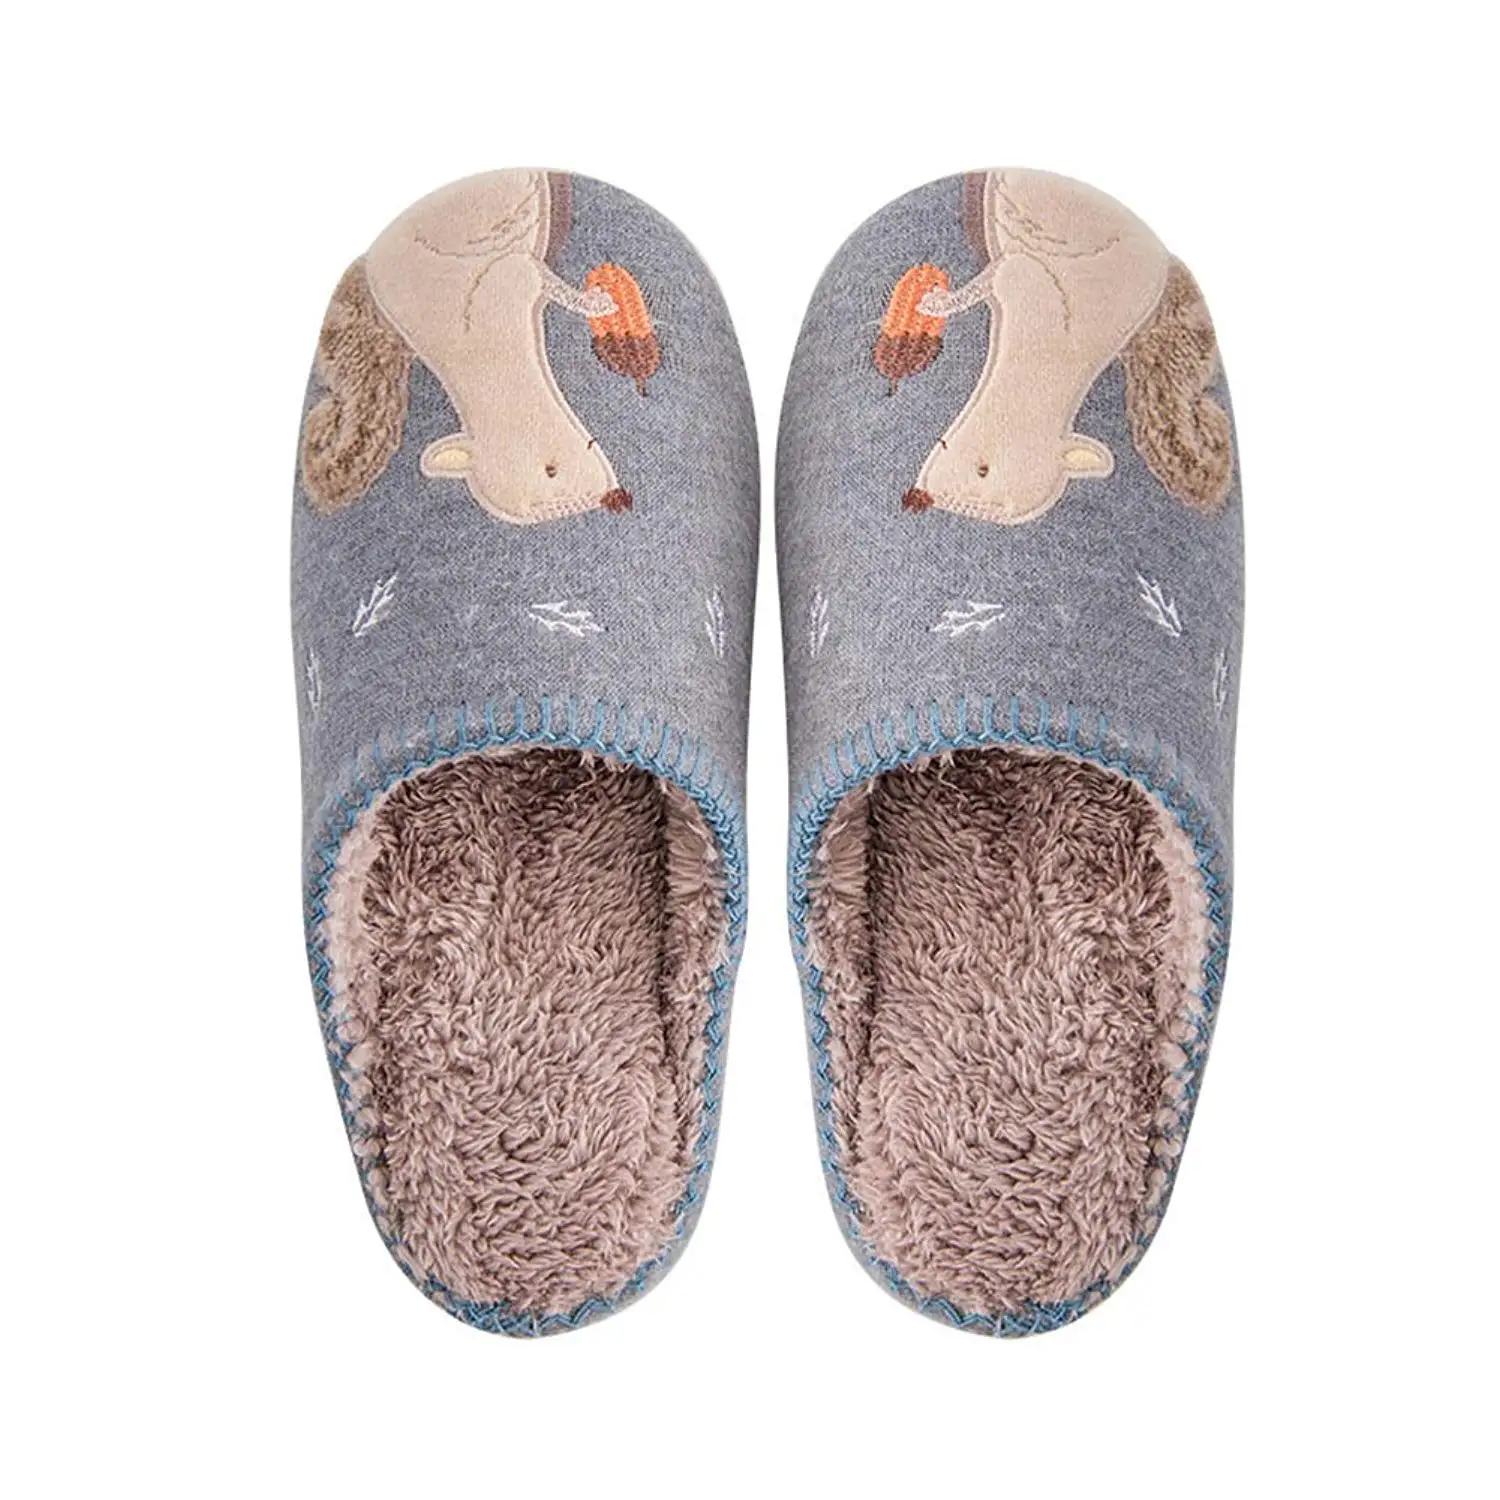 Cheap Japanese House Slippers, find Japanese House Slippers deals on ...